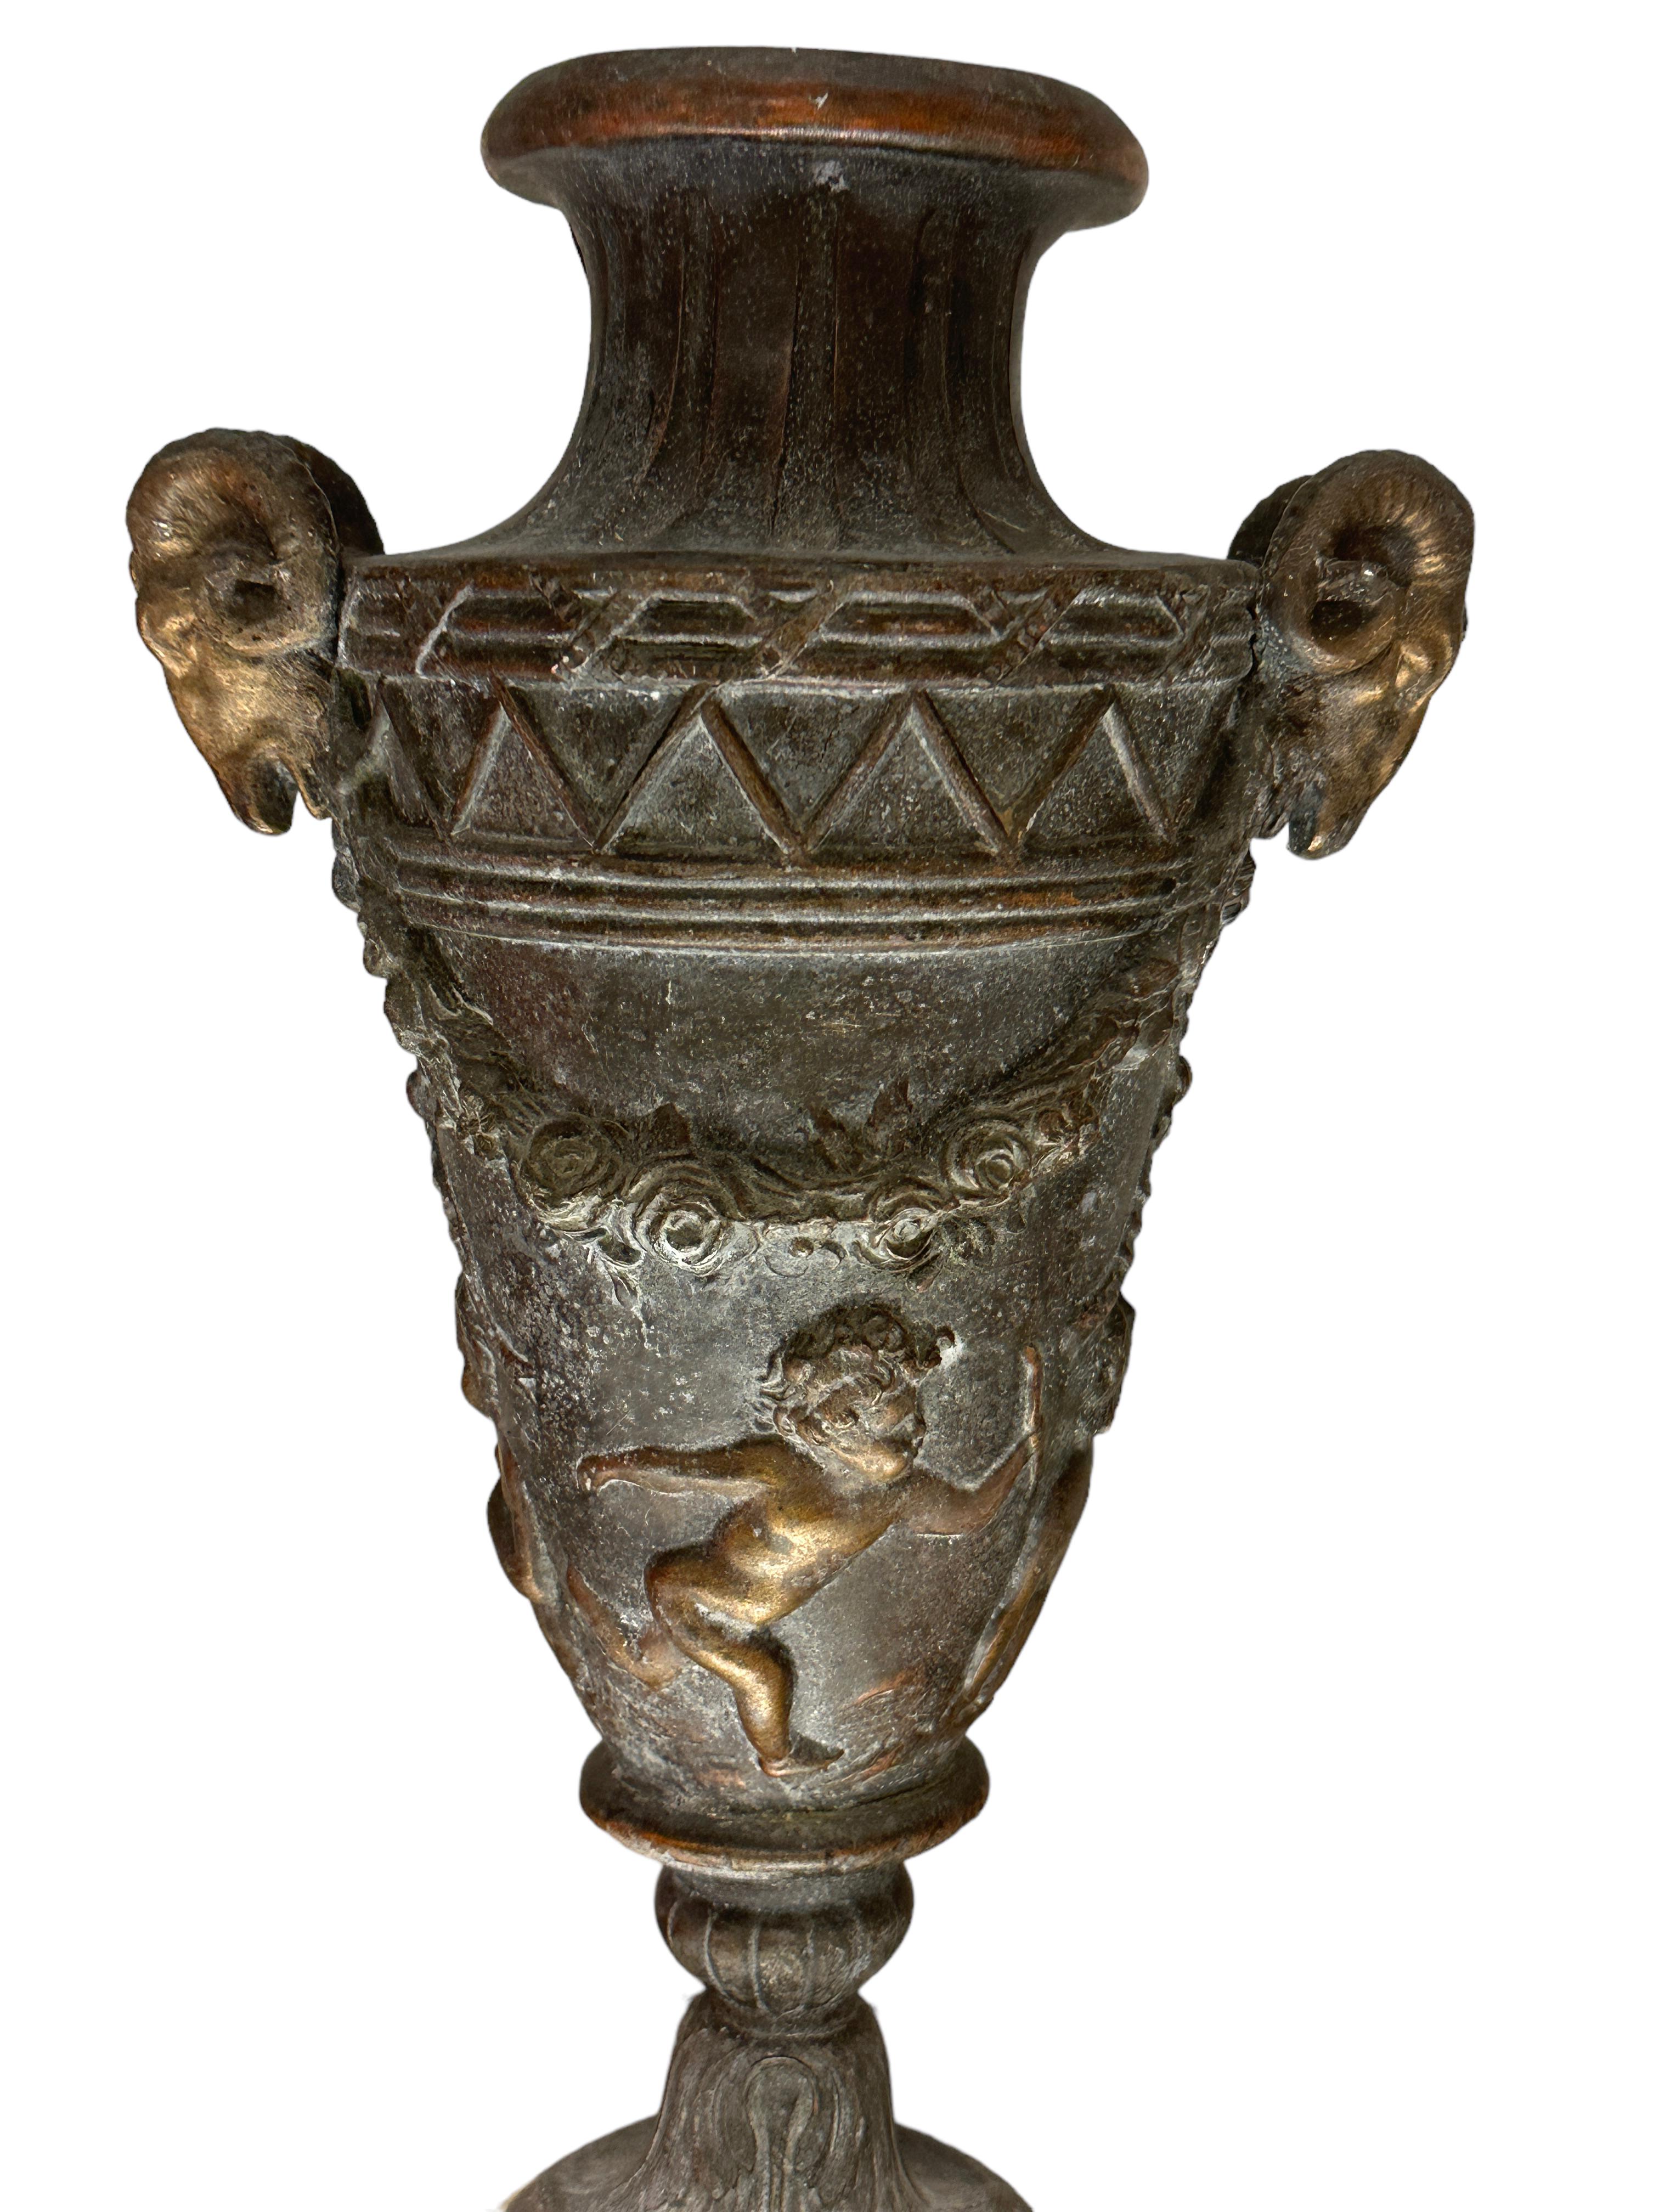 A beautiful pair of patinated bronze Bacchanal vases.
The vases are modeled with masks depicting chimeric ibexes, flanked by laurel garlands, above which are finely carved reliefs of young Cherubs running. Each vase stands on a fluted round marble